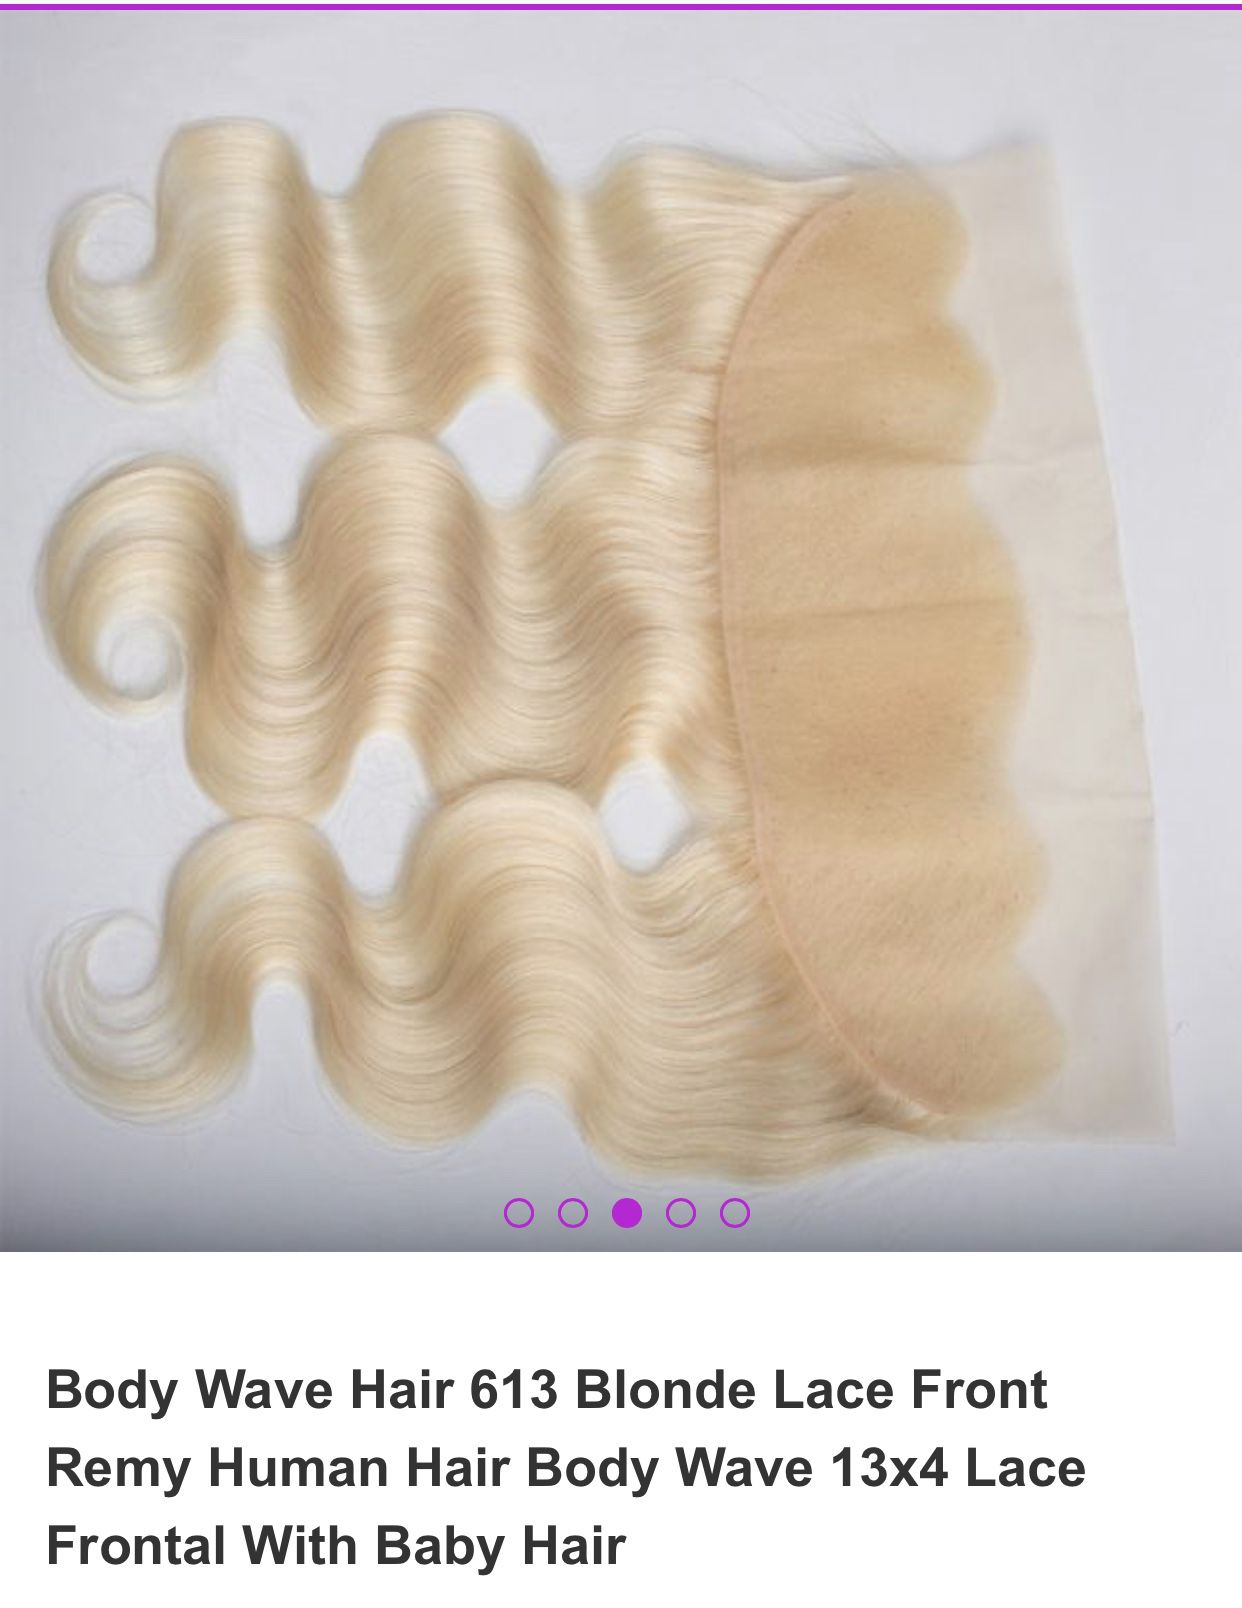 Frontal extensions wig weft